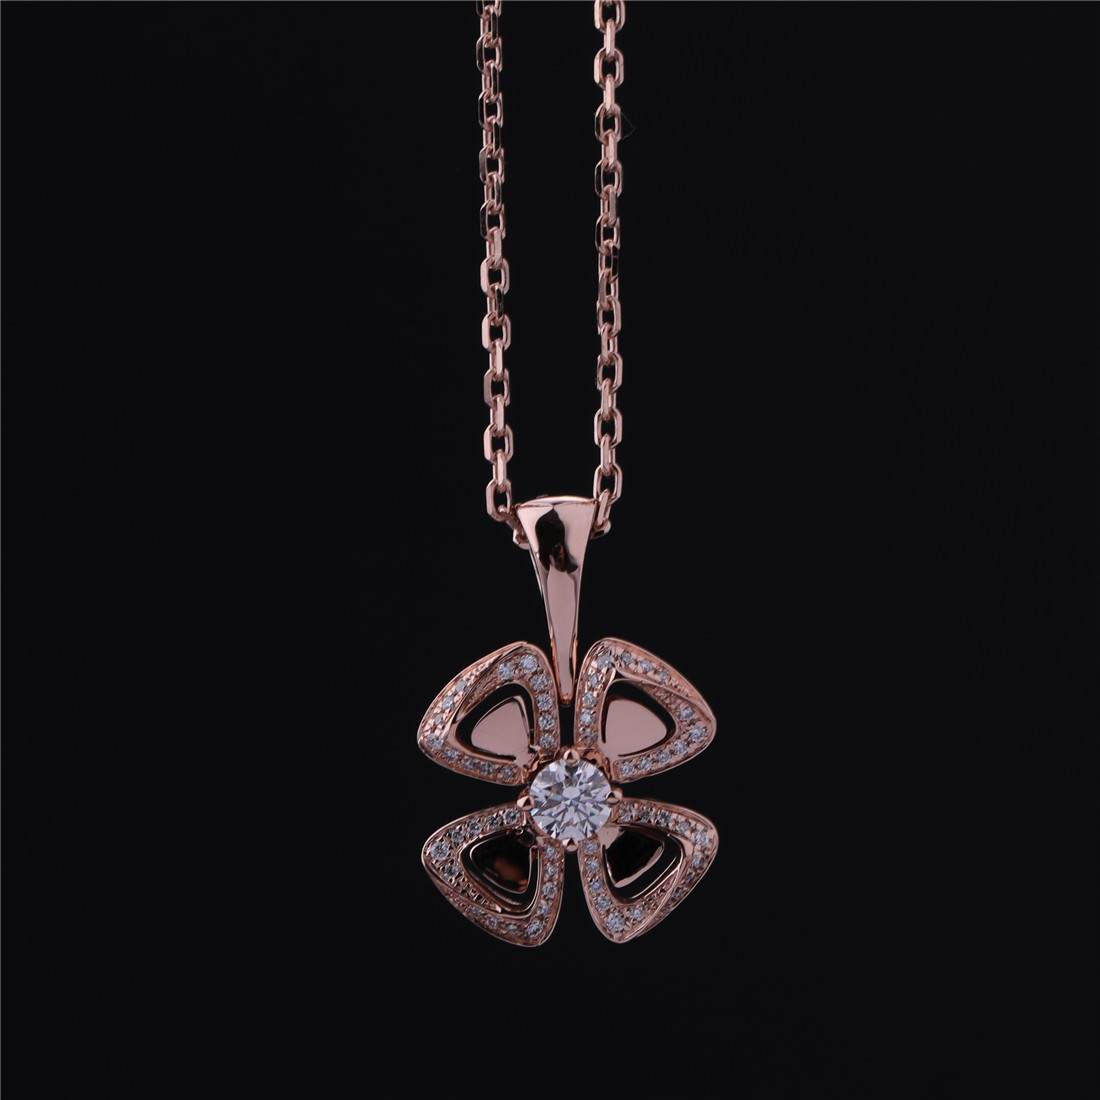 Quality Italy Fiorever Necklace 18K Rose Gold Pendant set with a central diamond and pavé diamonds REF 356223 for sale